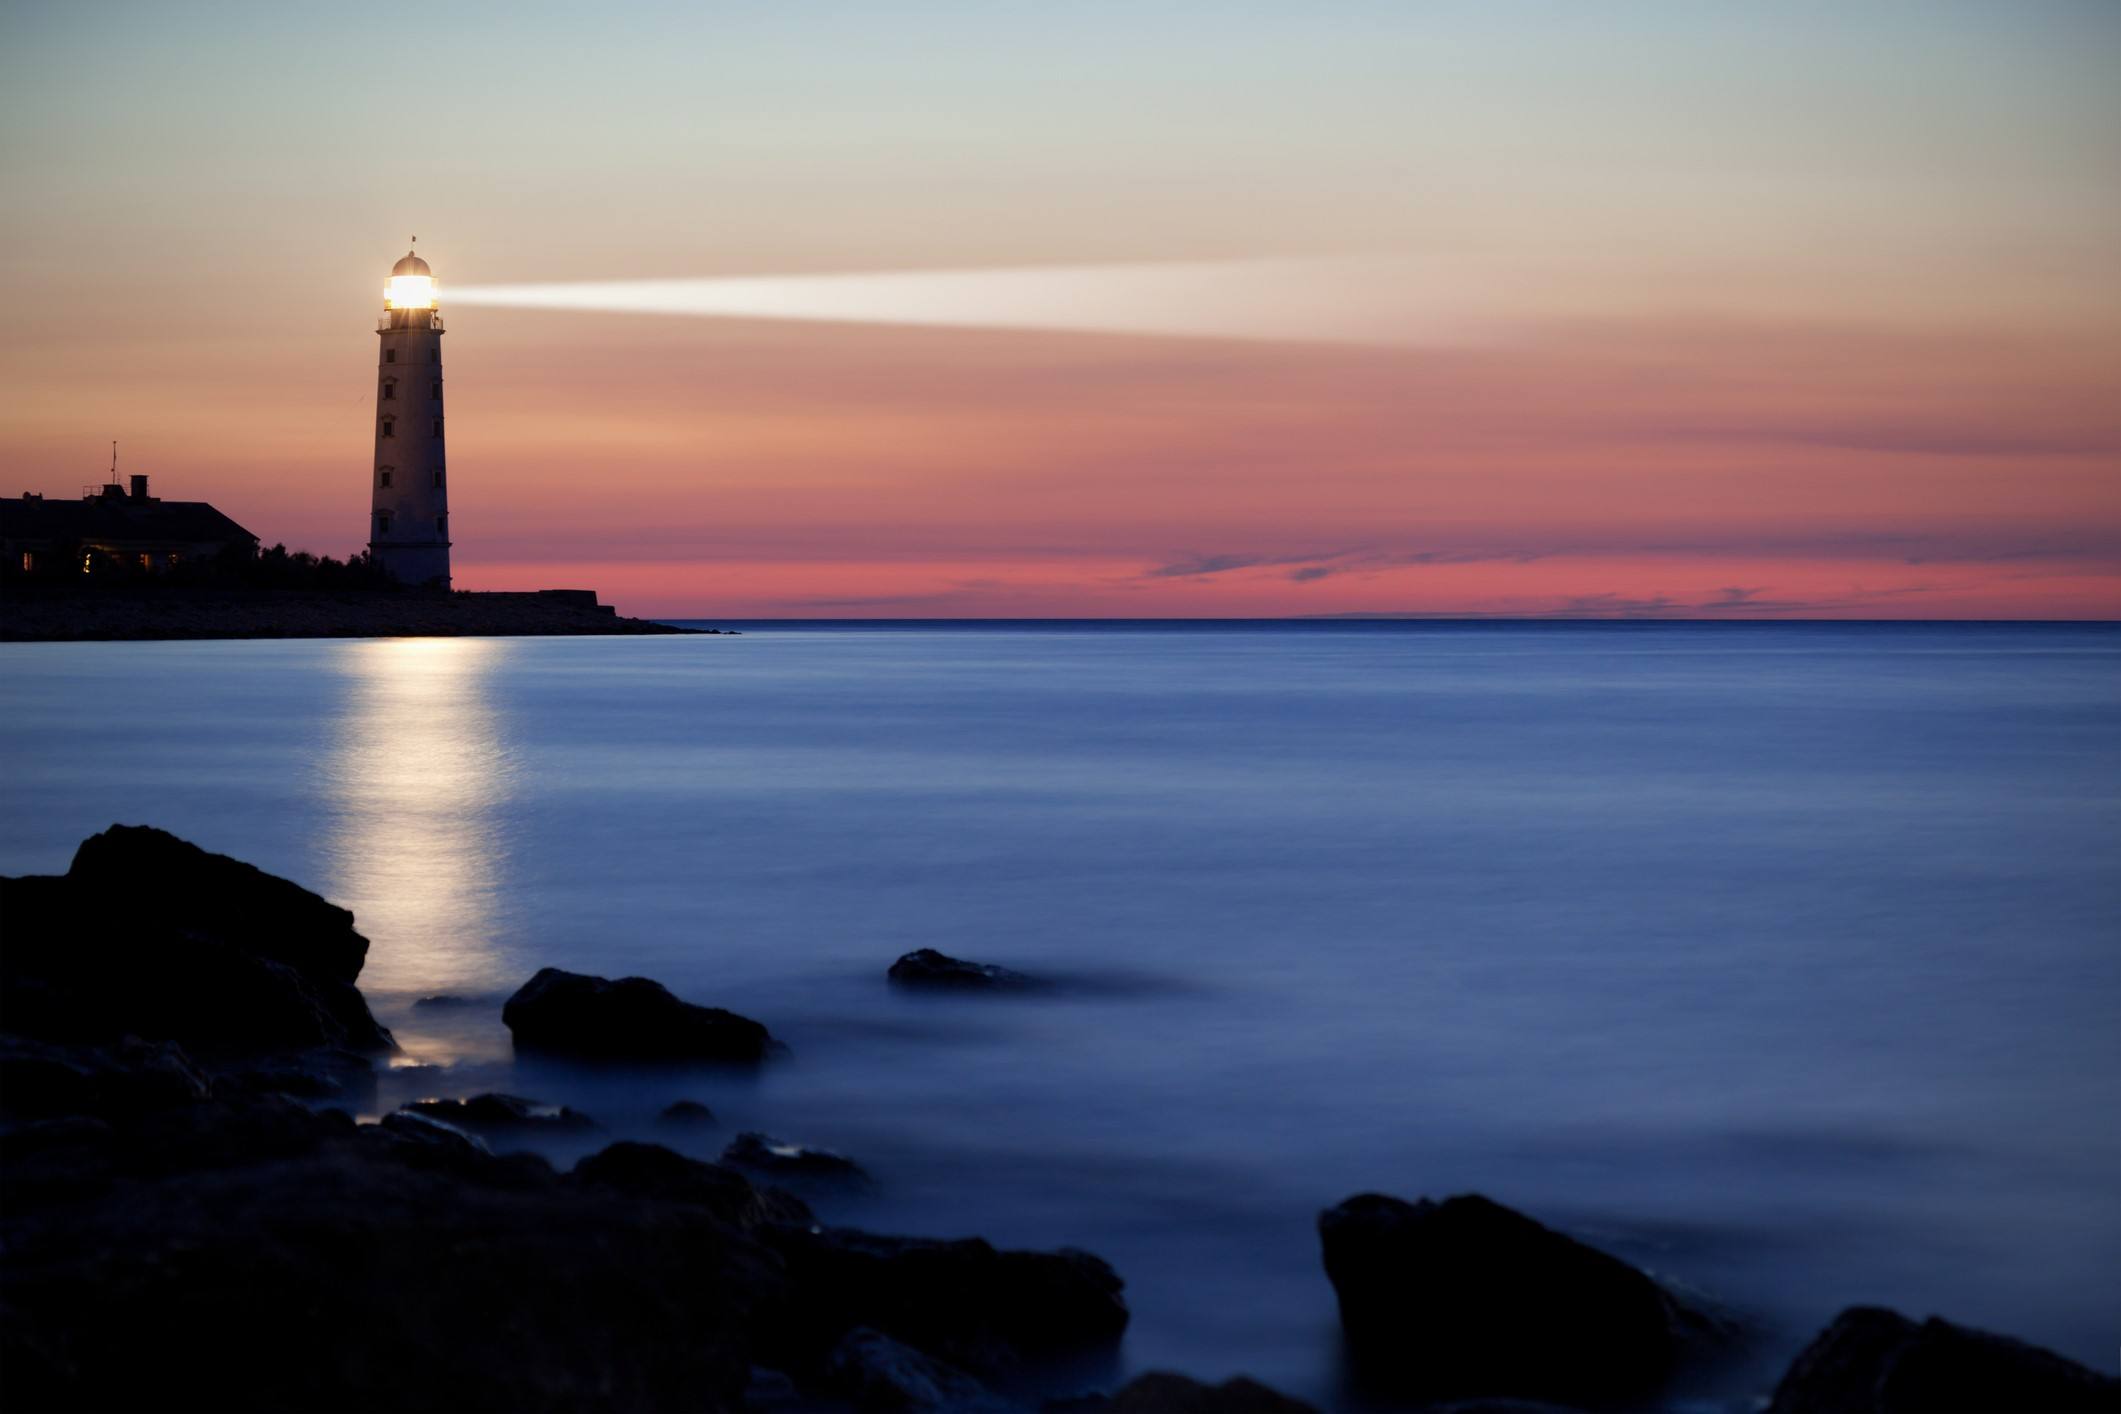 Coaching is like a light house - guidng you to success in life - Contact howard@howardkent.com for Executive and Leadership Coaching for Results